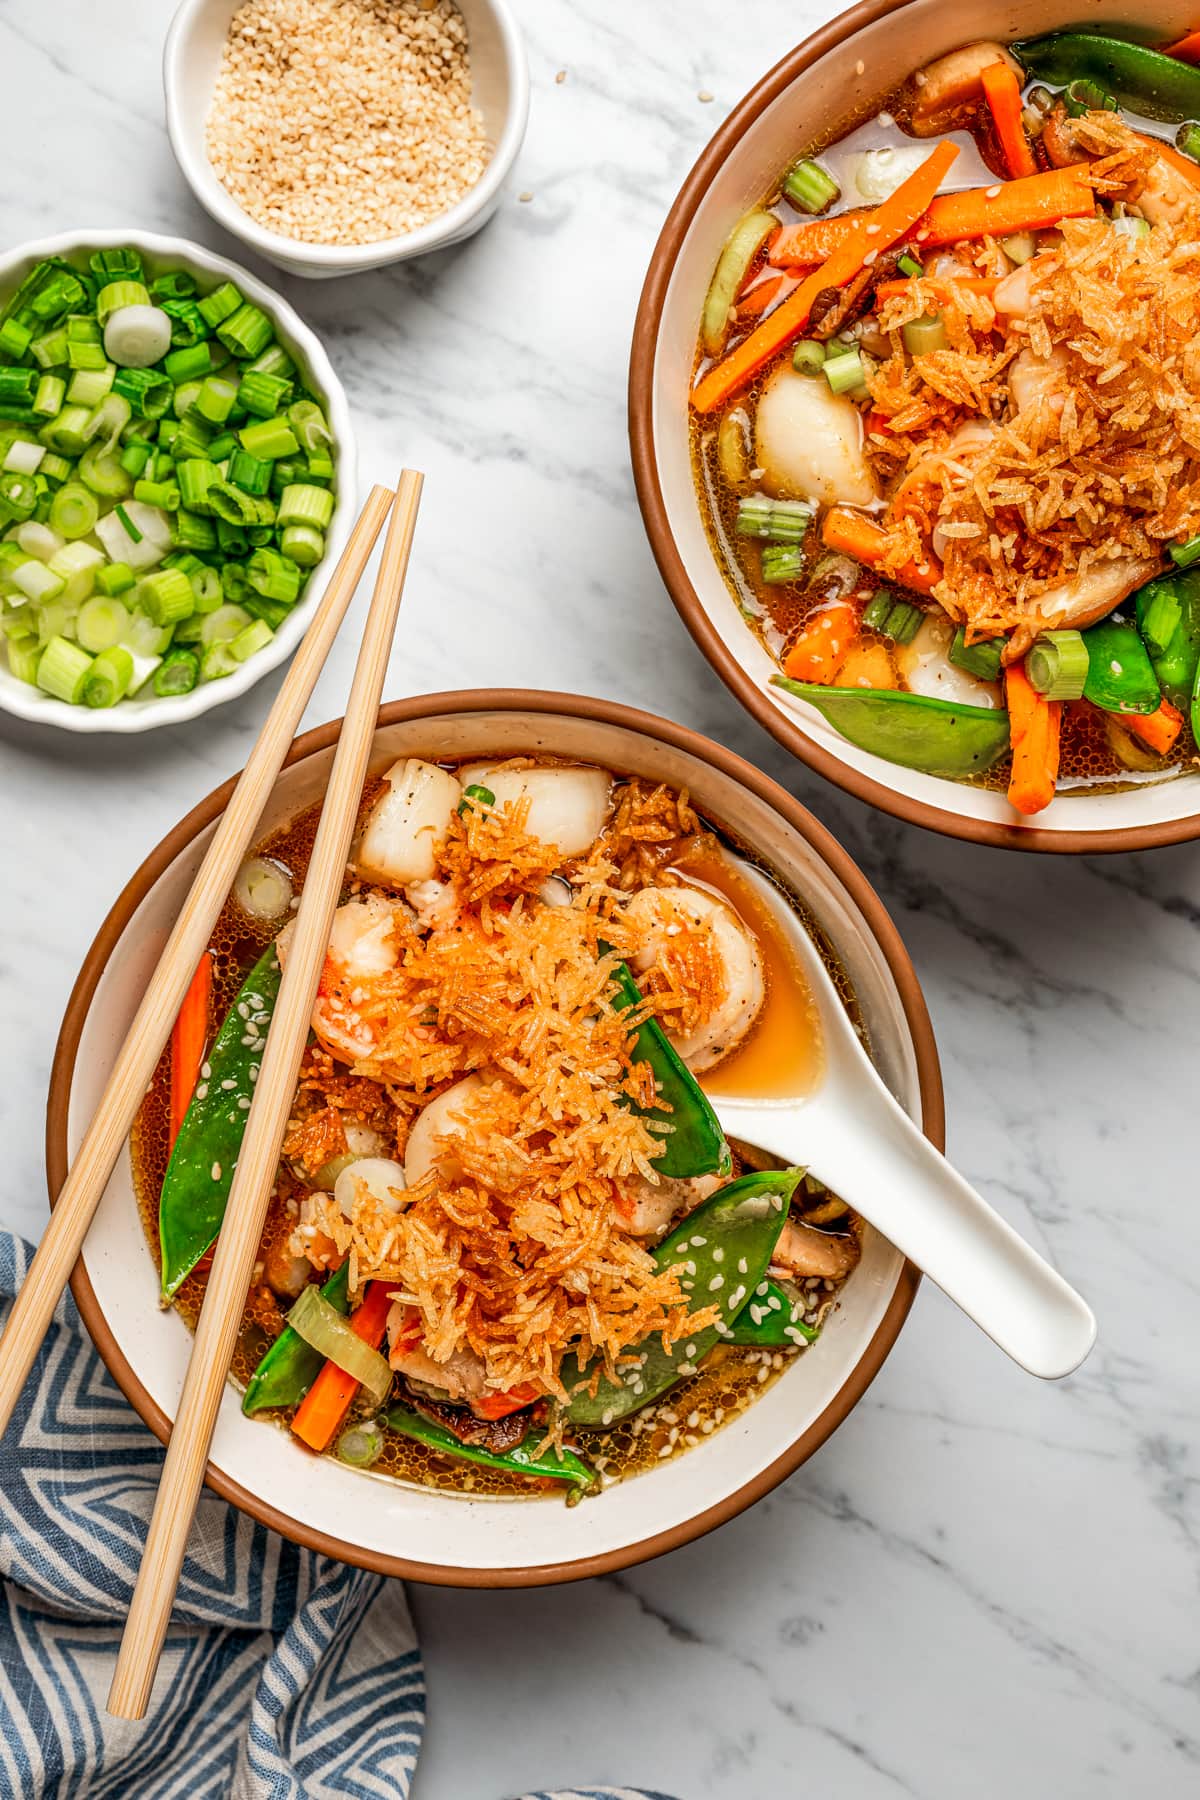 Overhead image of two soup bowls with broth, scallops, shrimp, and veggies, topped with fried rice, with chopsticks resting on one of the bowls.